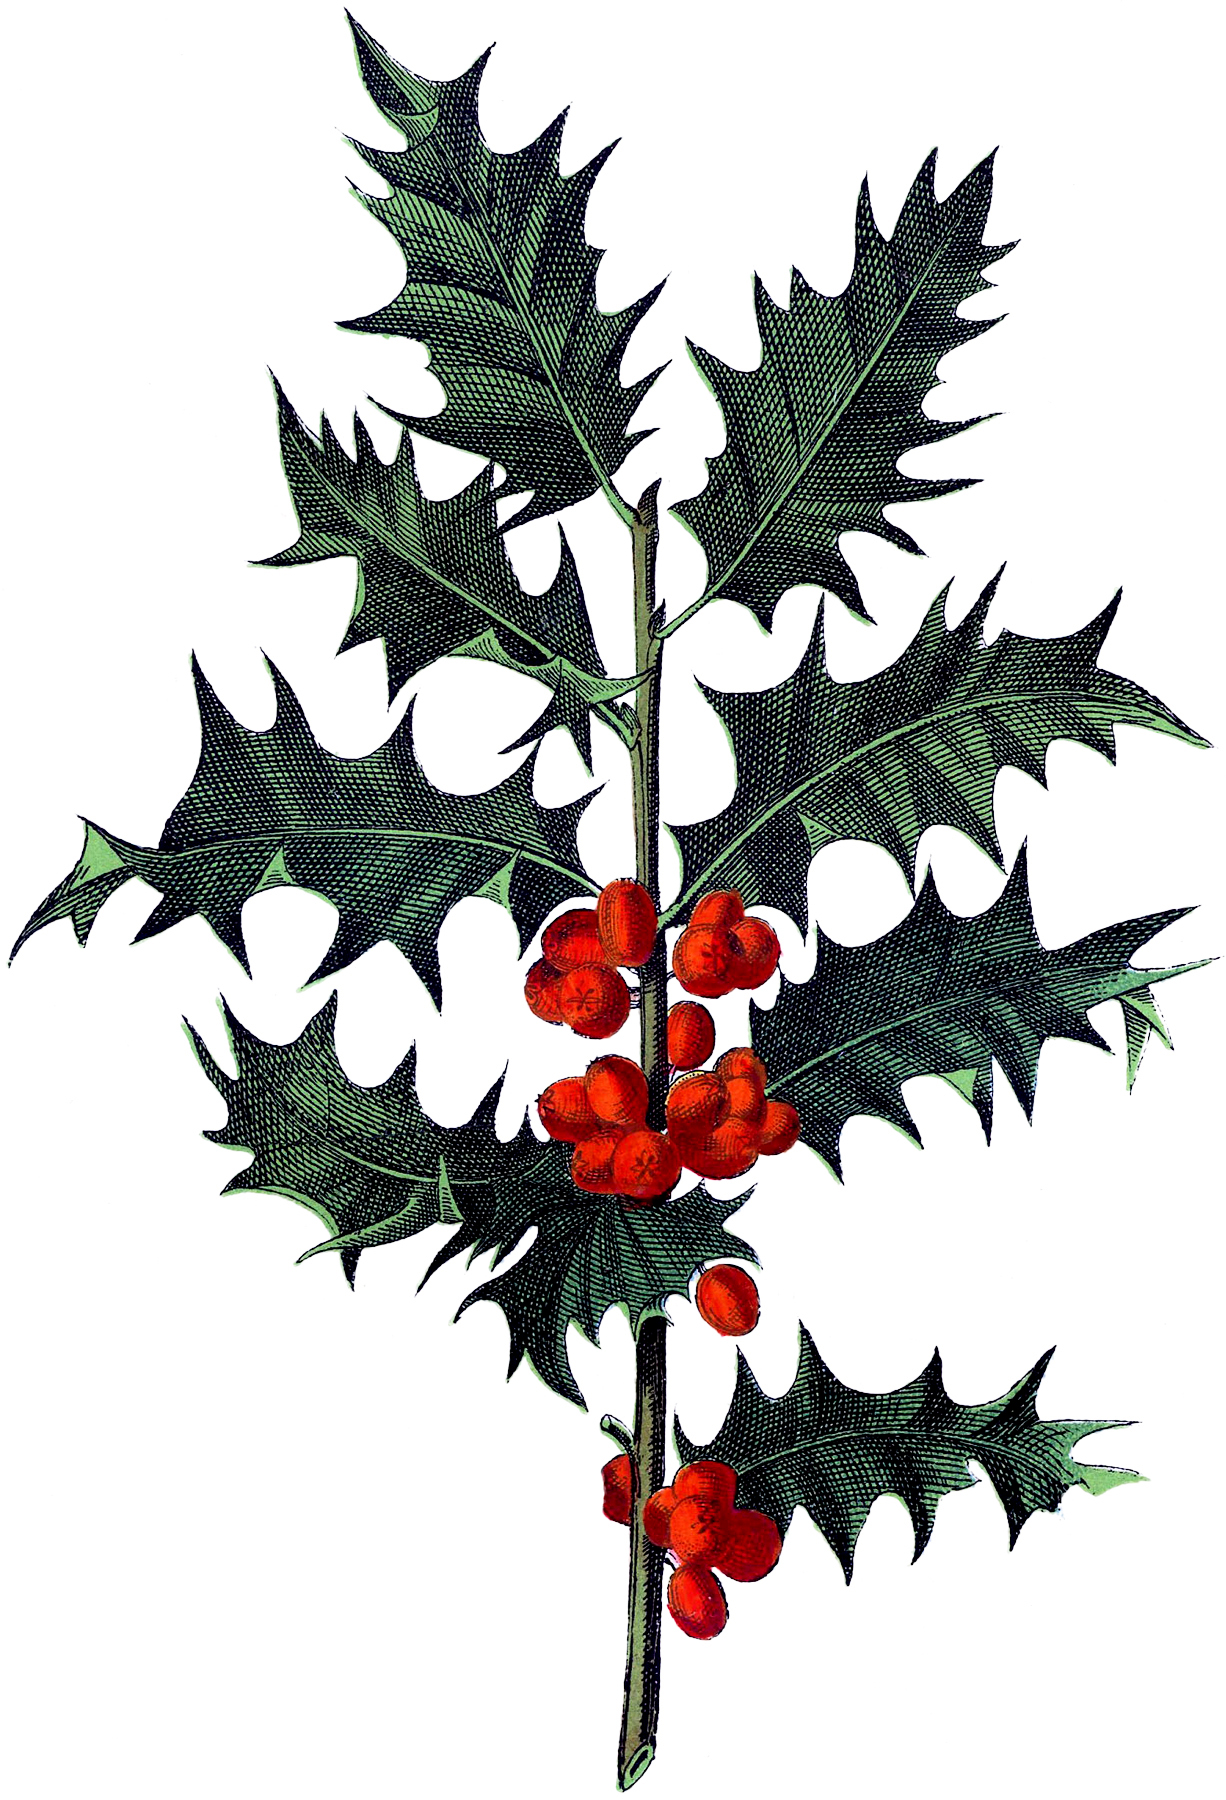 Antique Botanical Holly Image! - The Graphics Fairy